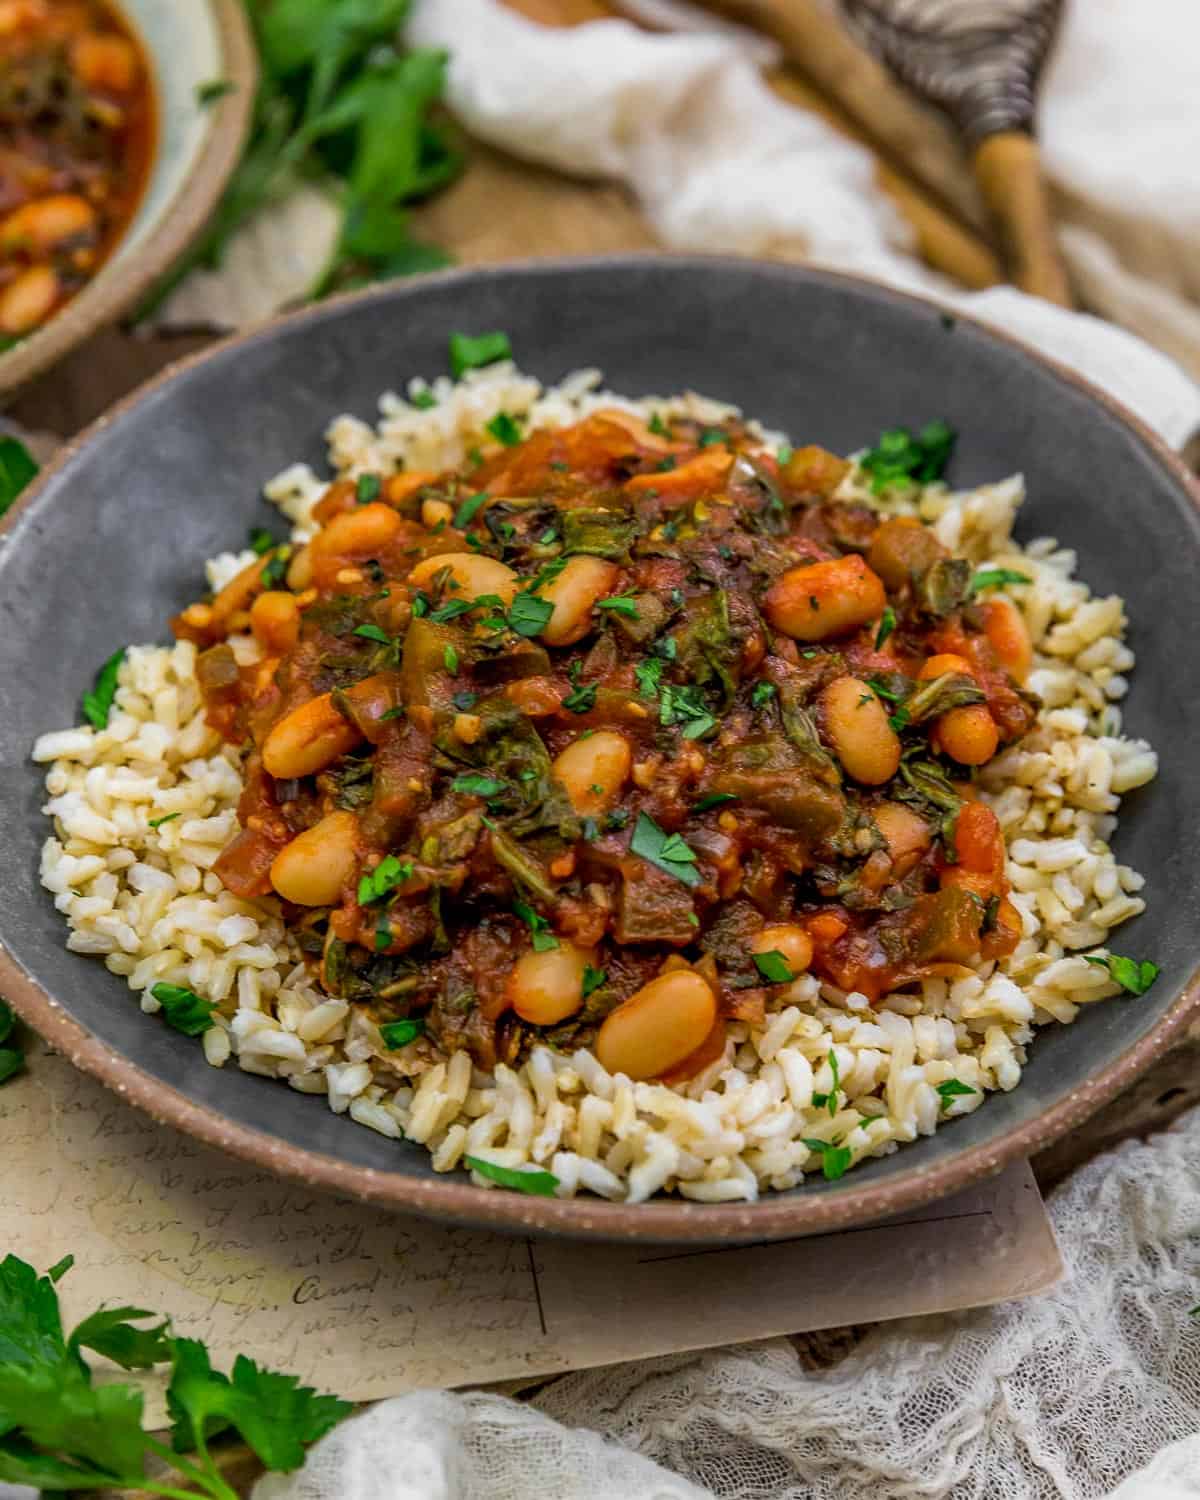 BBQ Braised Kale and Beans Skillet over rice